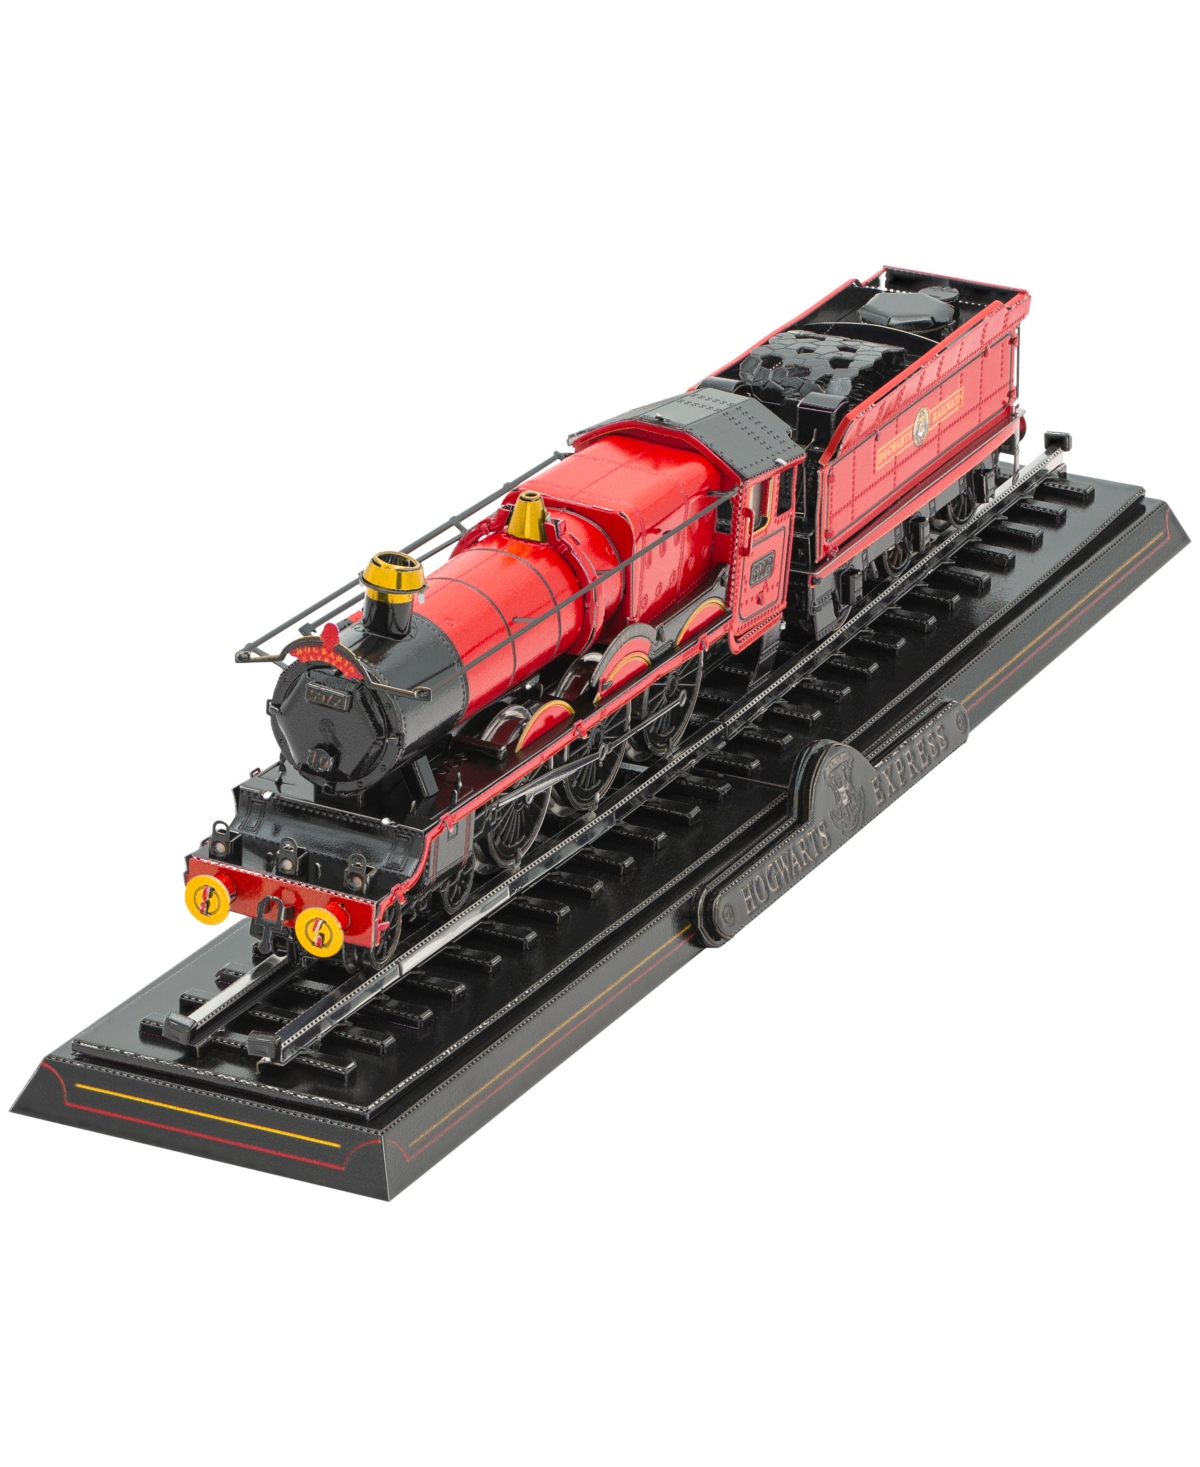 University Games Fascinations Metal Earth 3d Metal Model Kit Harry Potter Hogwarts Express With Track In No Color